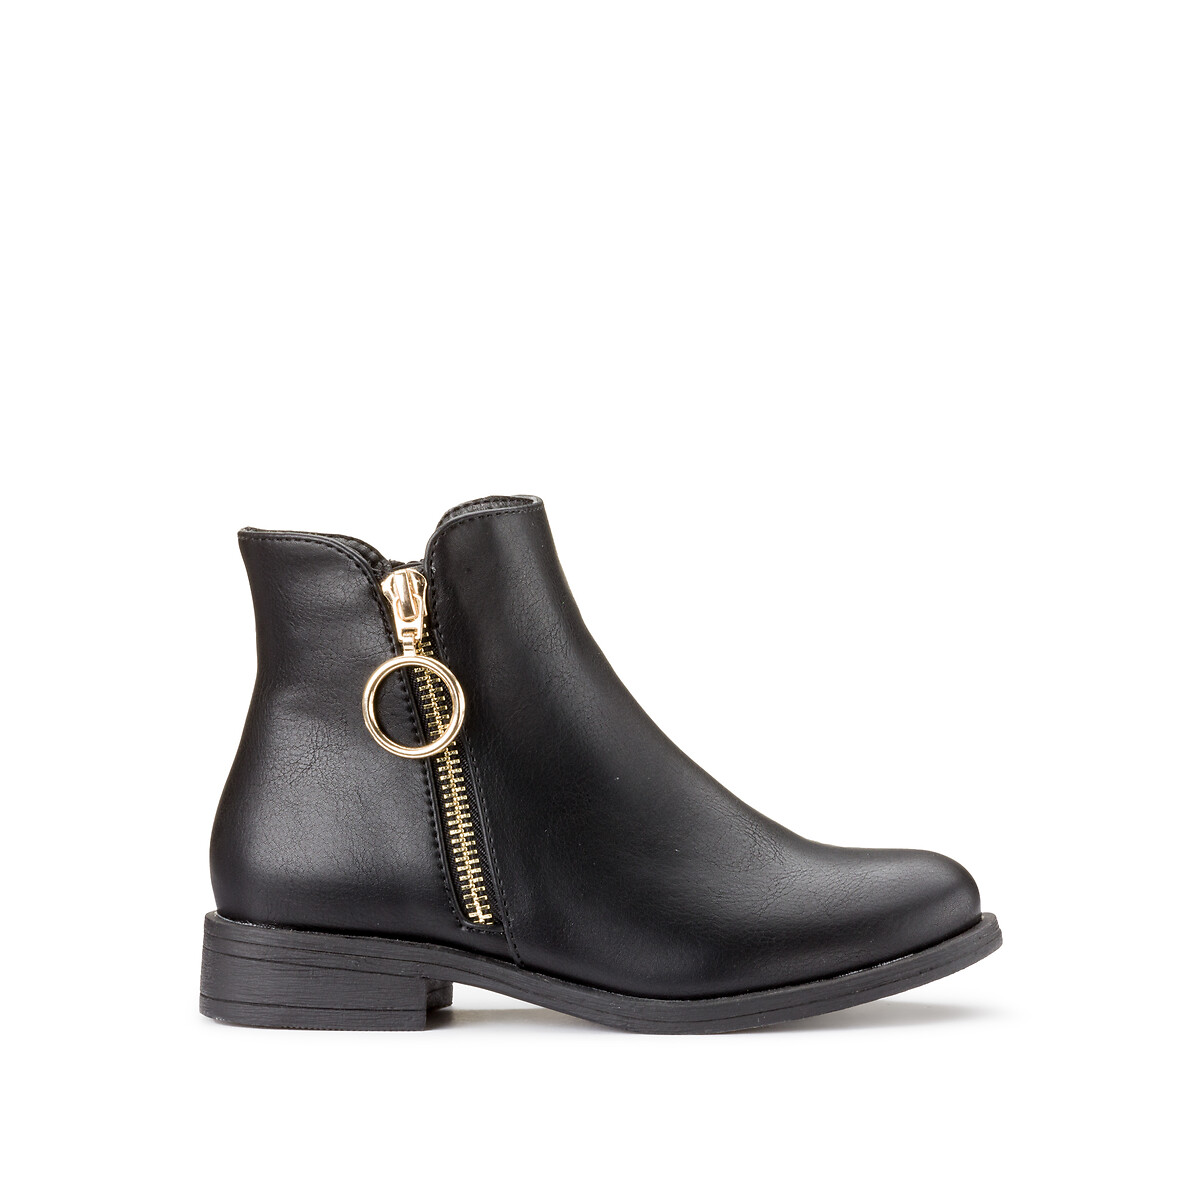 Kids Zip-Up Ankle Boots